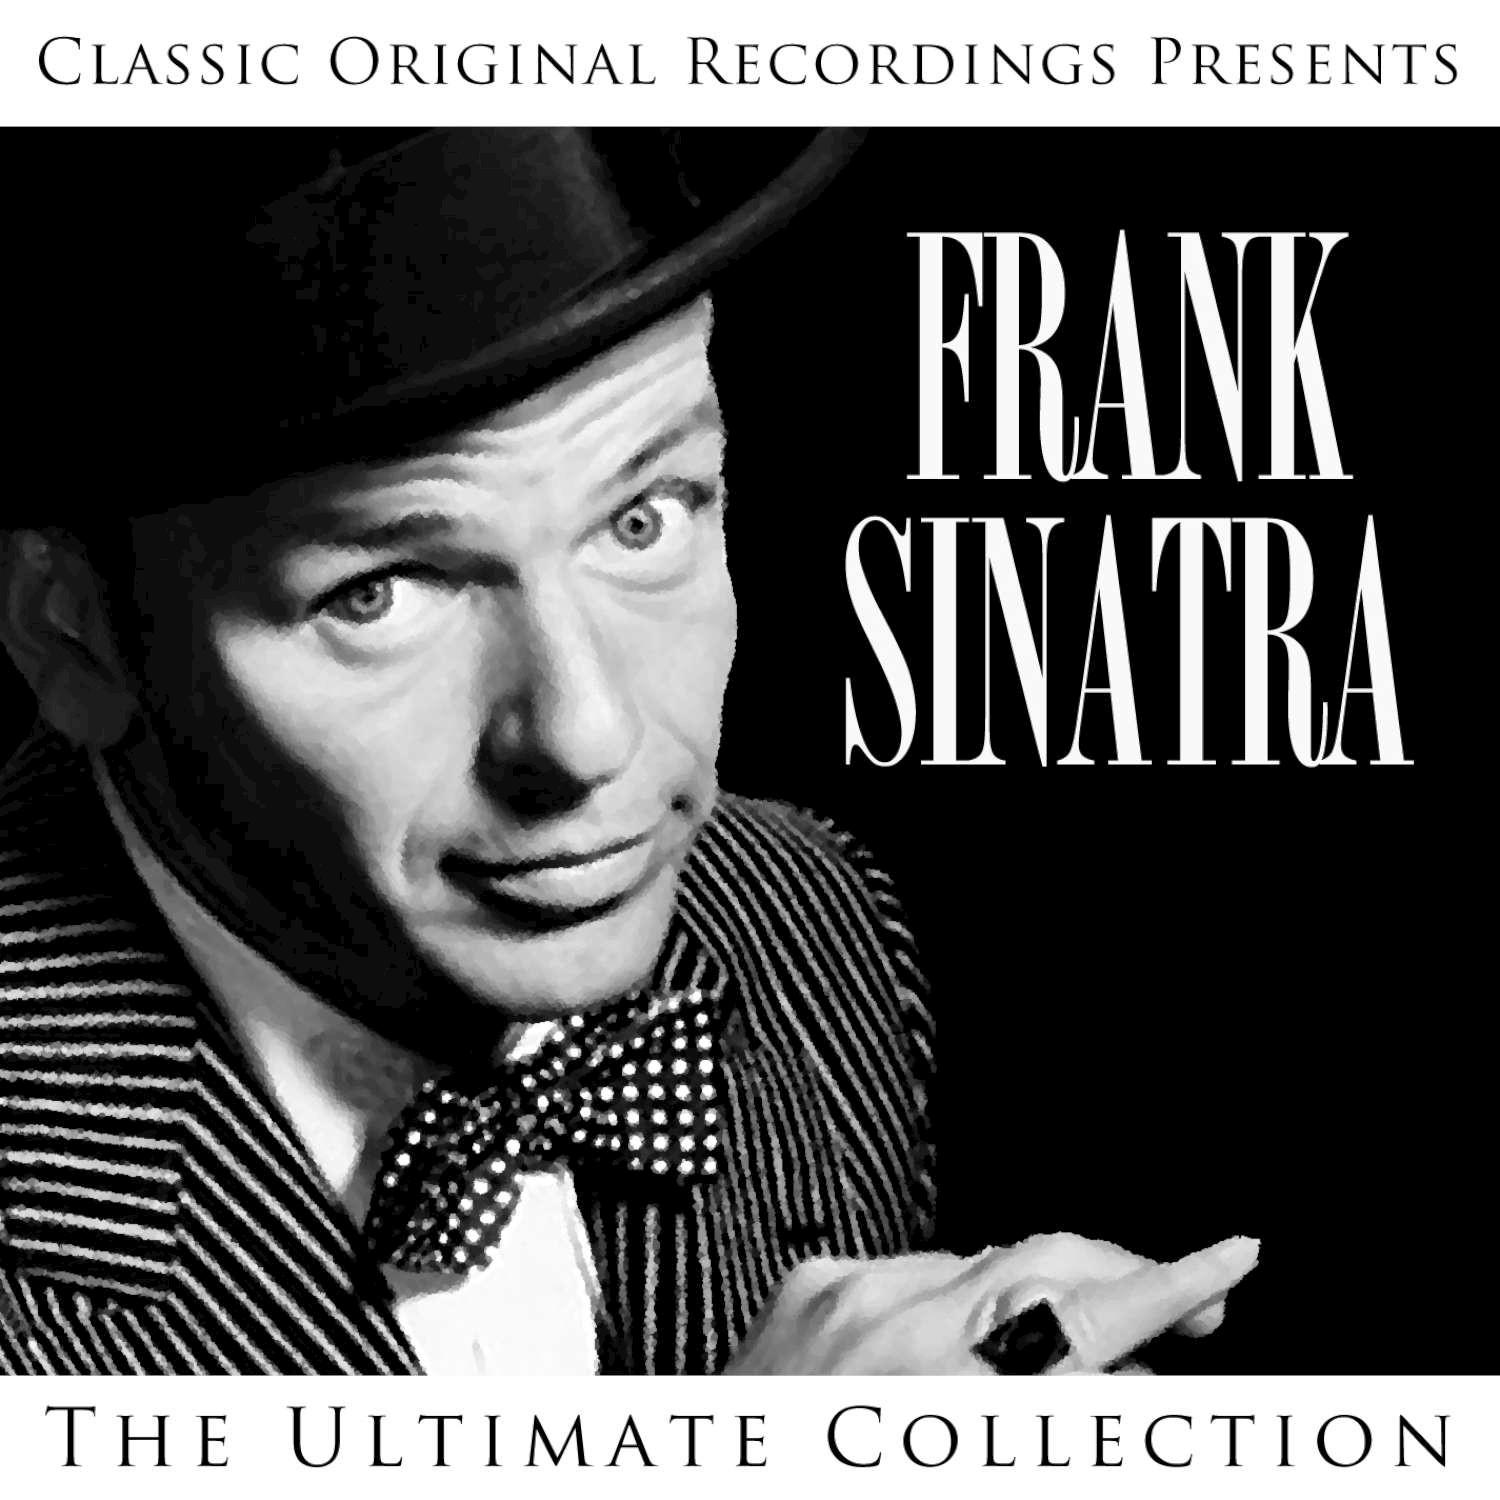 Classic Original Recordings Presents - Frank Sinatra - The Ultimate Collection